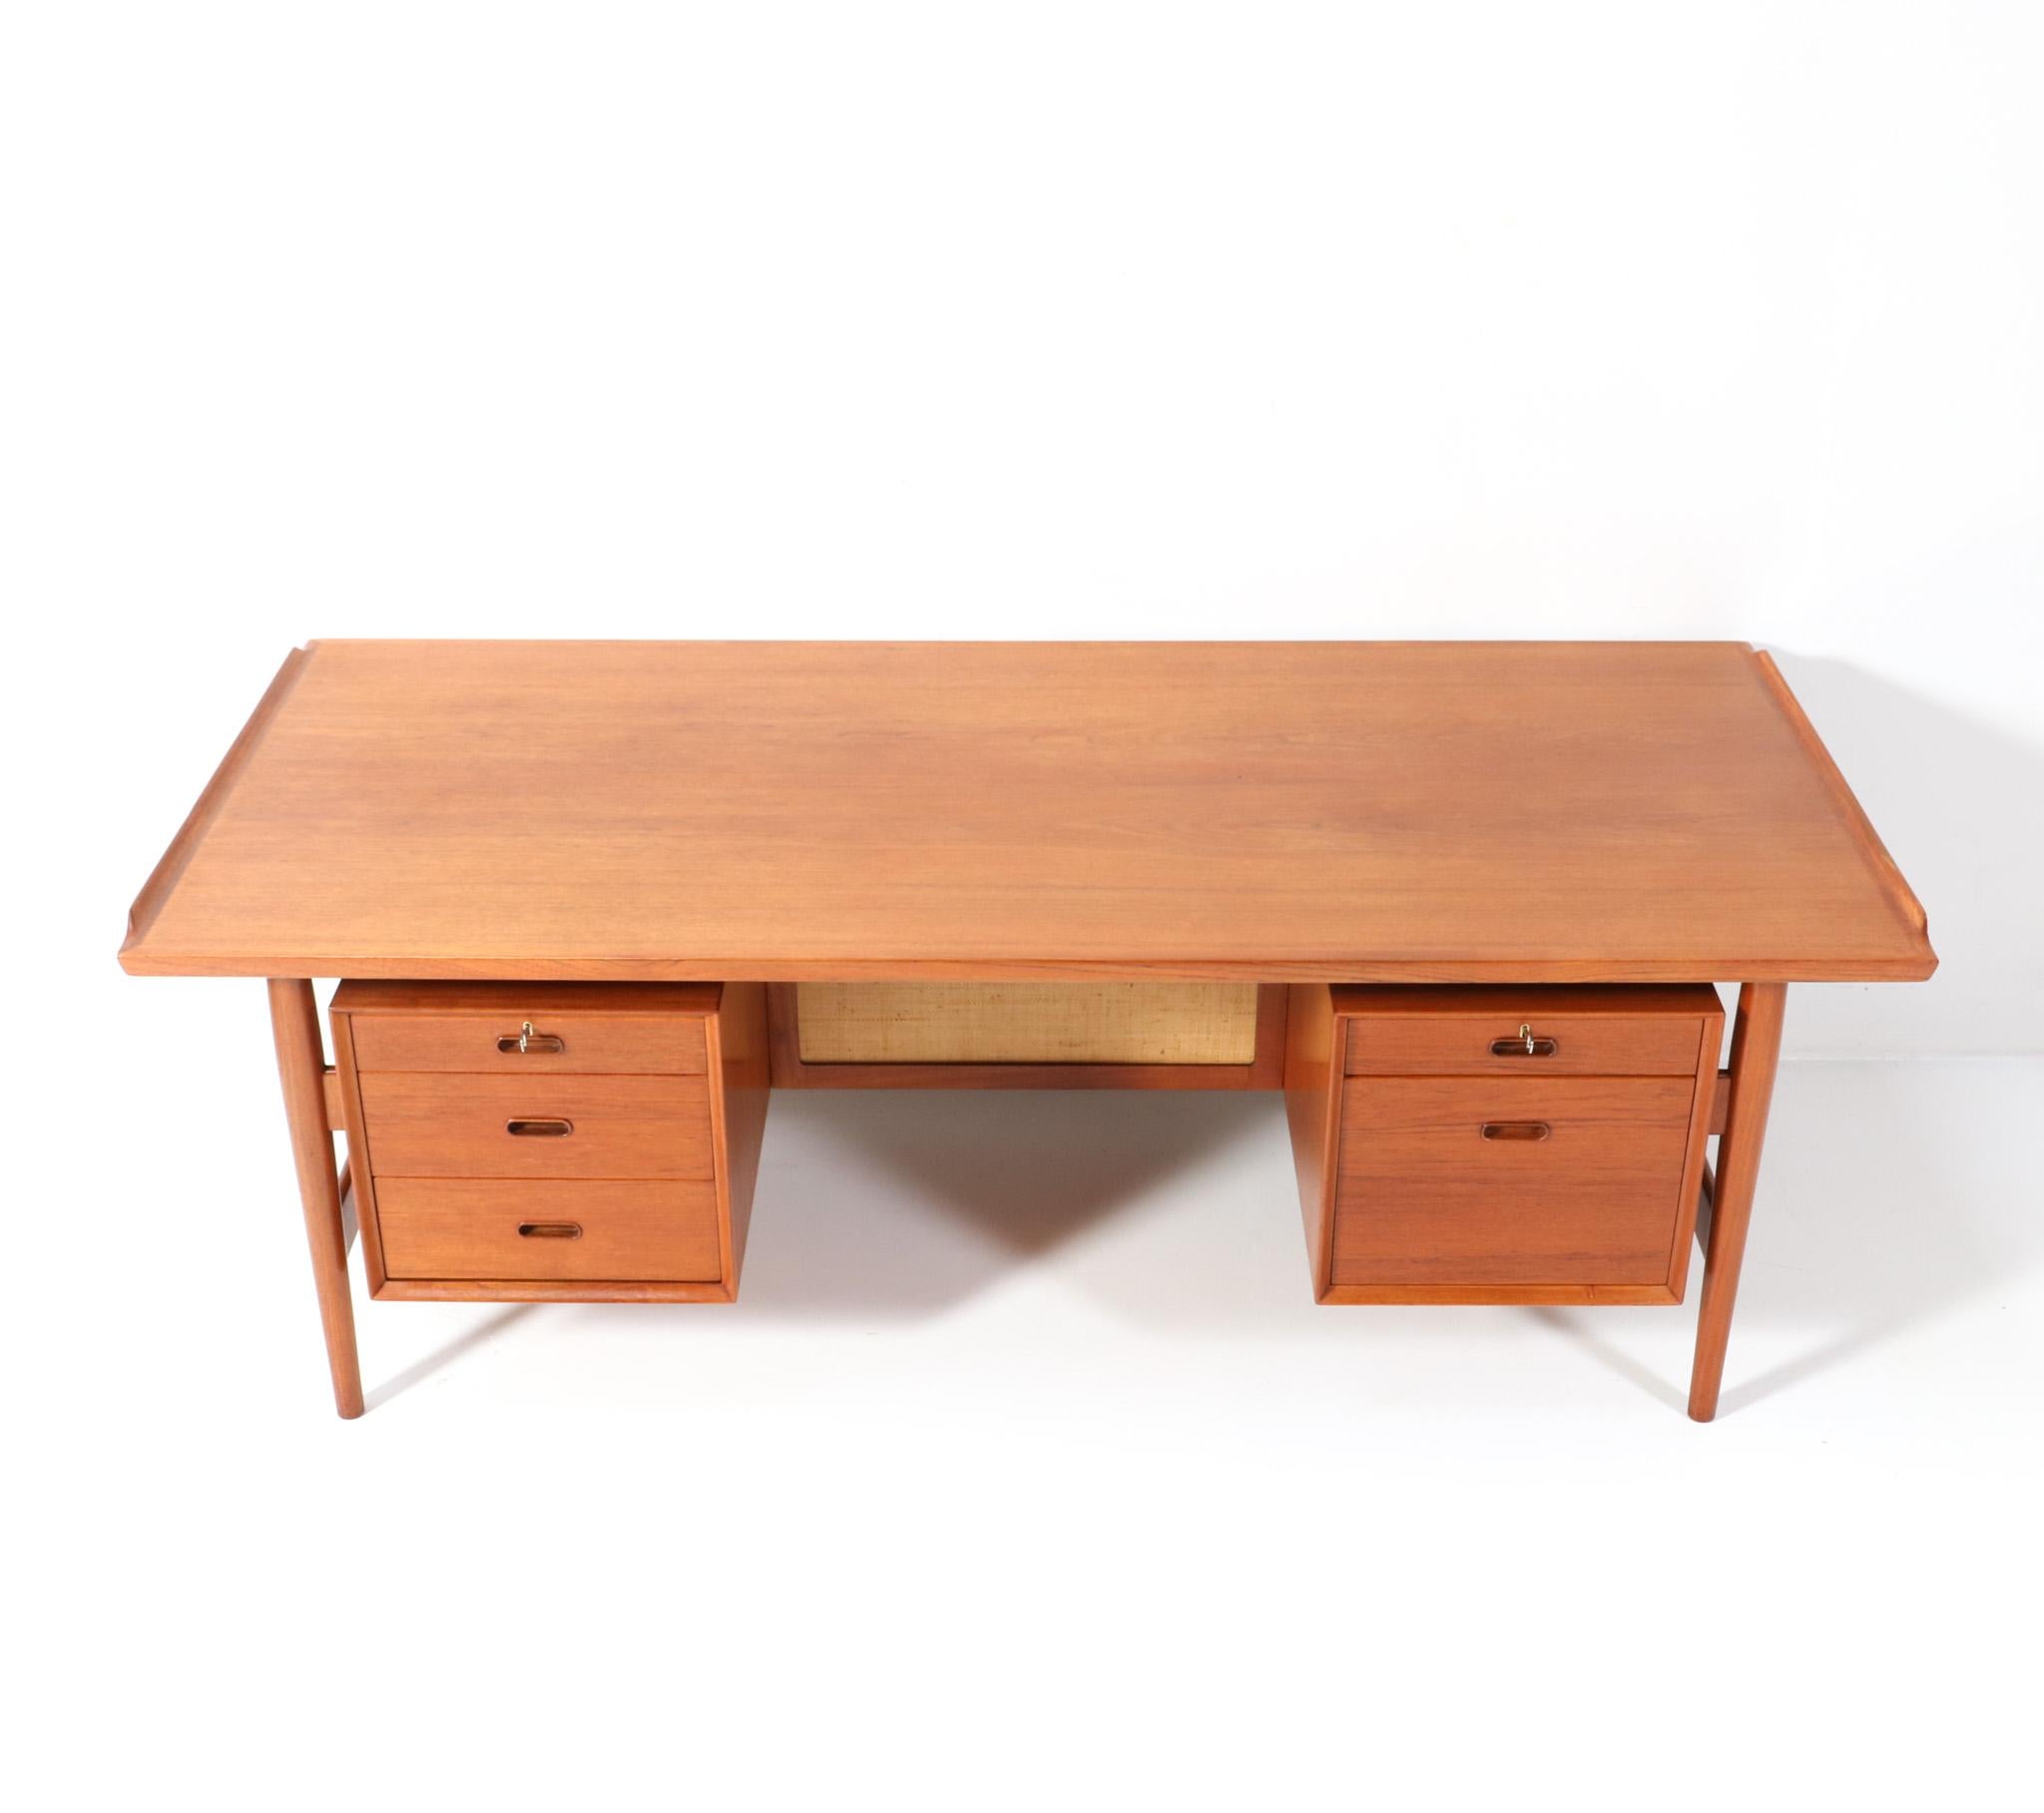 Magnificent and rare Mid-Century Modern executive desk 207.
Design by Arne Vodder for Sibast Denmark.
Striking Danish design from the 1960s.
Solid teak base with three original drawers on the left side and one drawer and a larger compartment on the